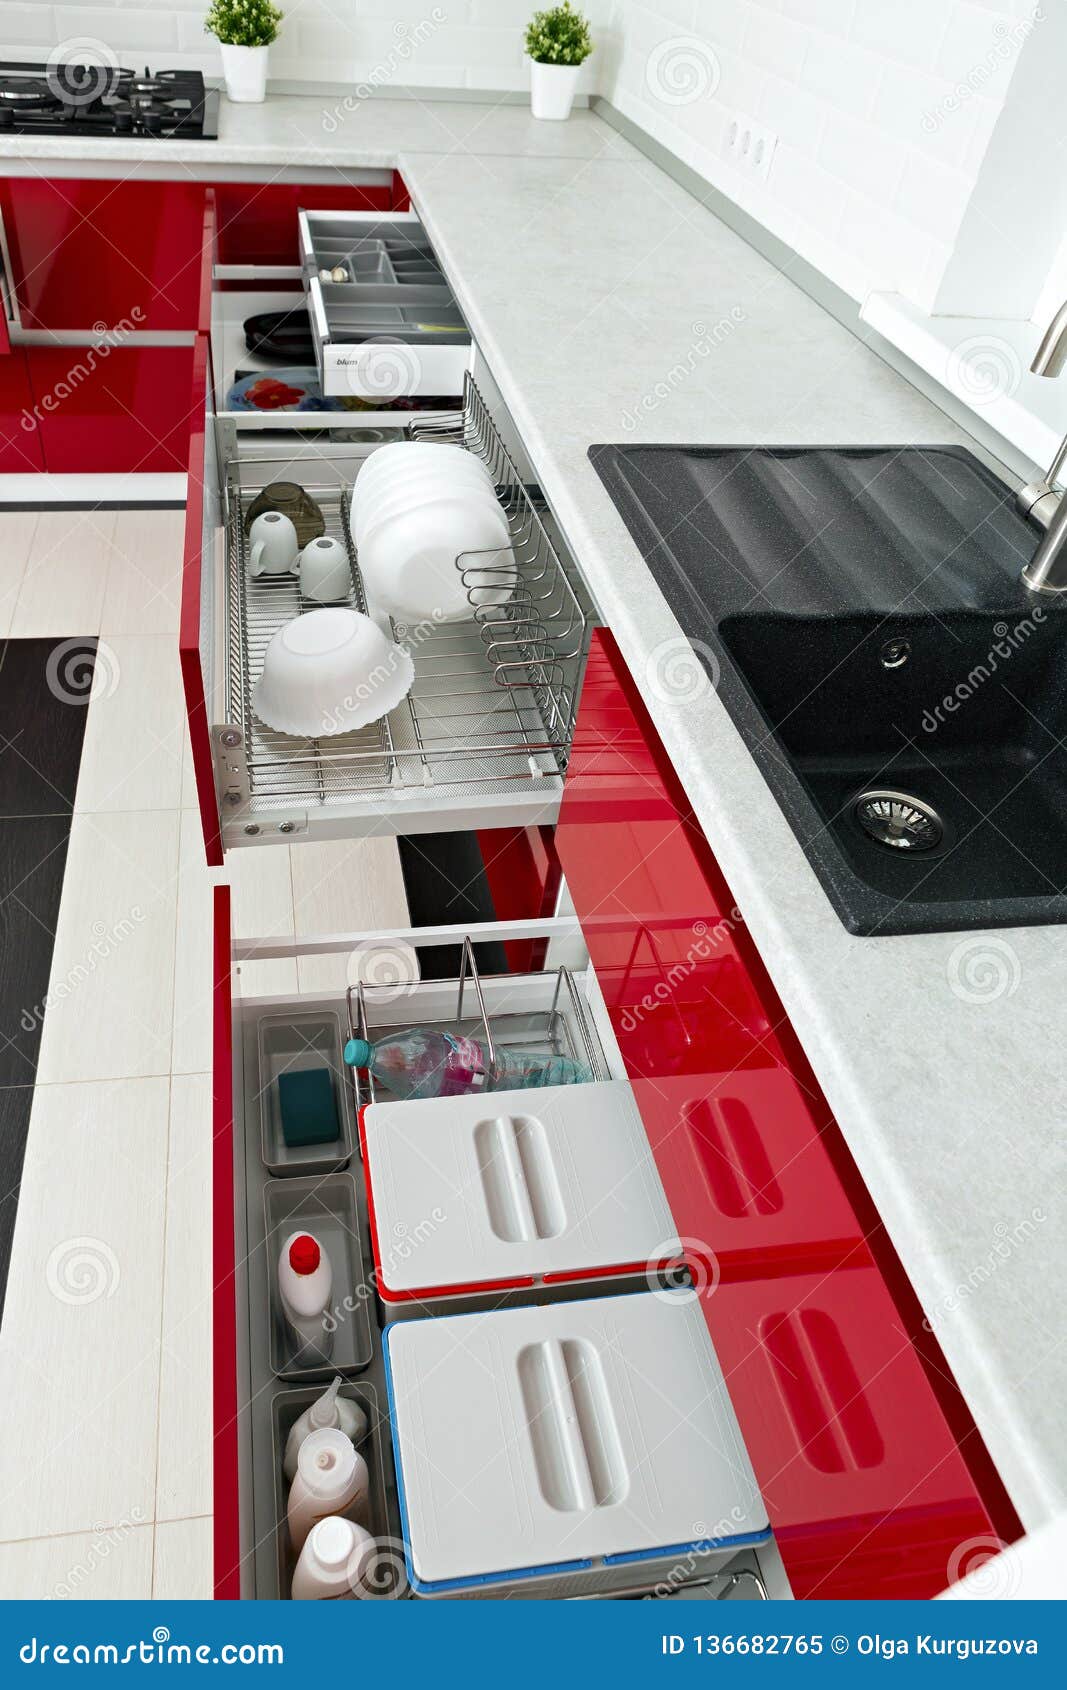 Water Faucet Sink And Drawers In The Modern Kitchen Stock Image